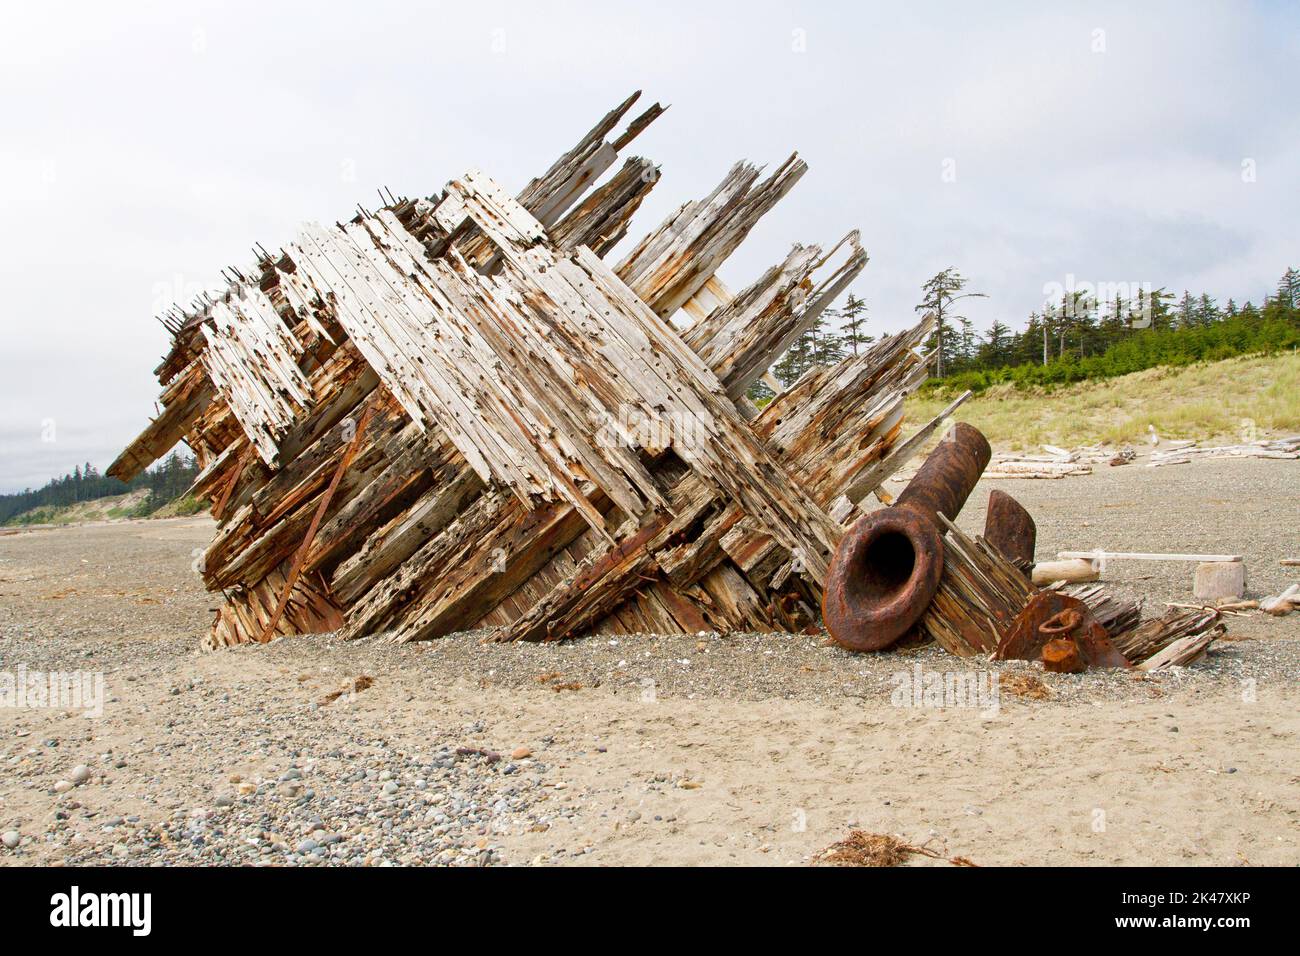 The remaining hull of the Pesuta shipwreck lying in sand north of Tlell River on East Beach in the Naikoon Provincial Park, Haida Gwaii, BC, Canada Stock Photo